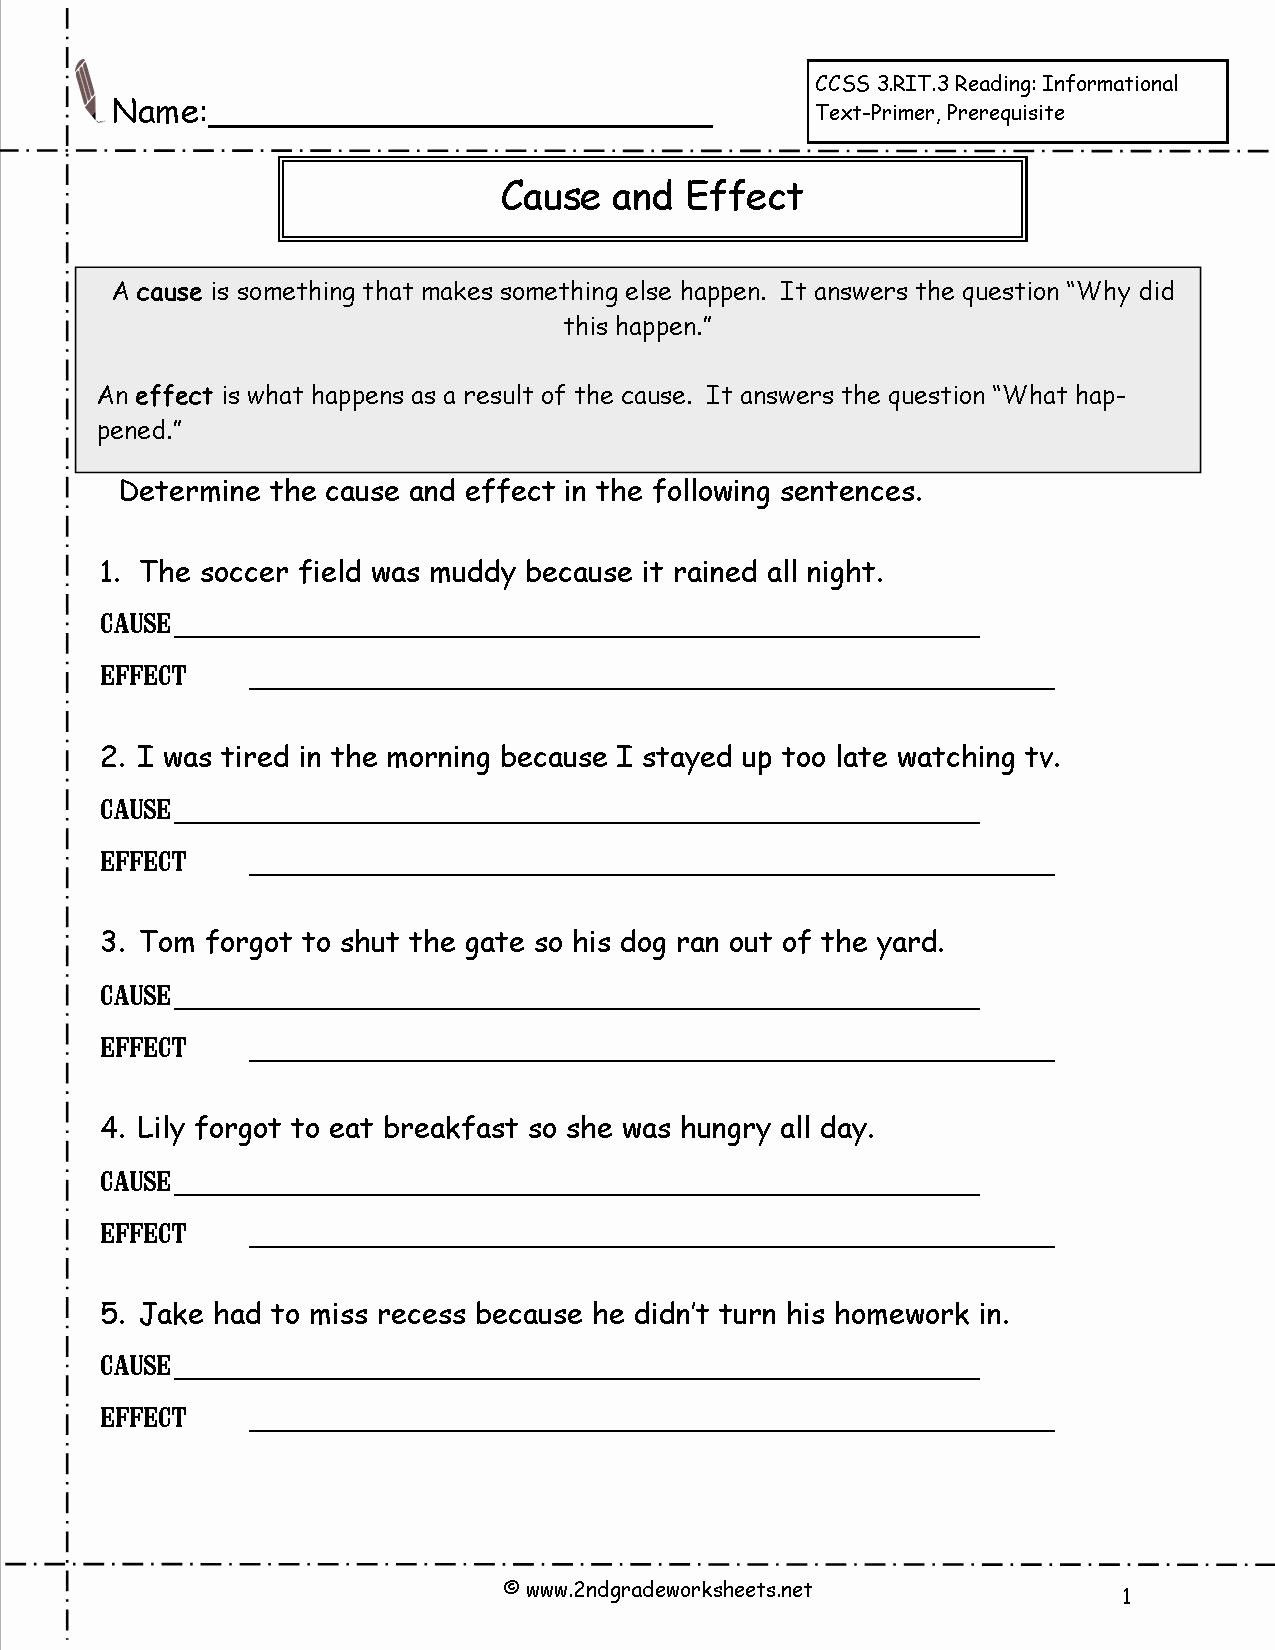 Accuracy and Precision Worksheet Answers Prime Free Cause and Effect Worksheets